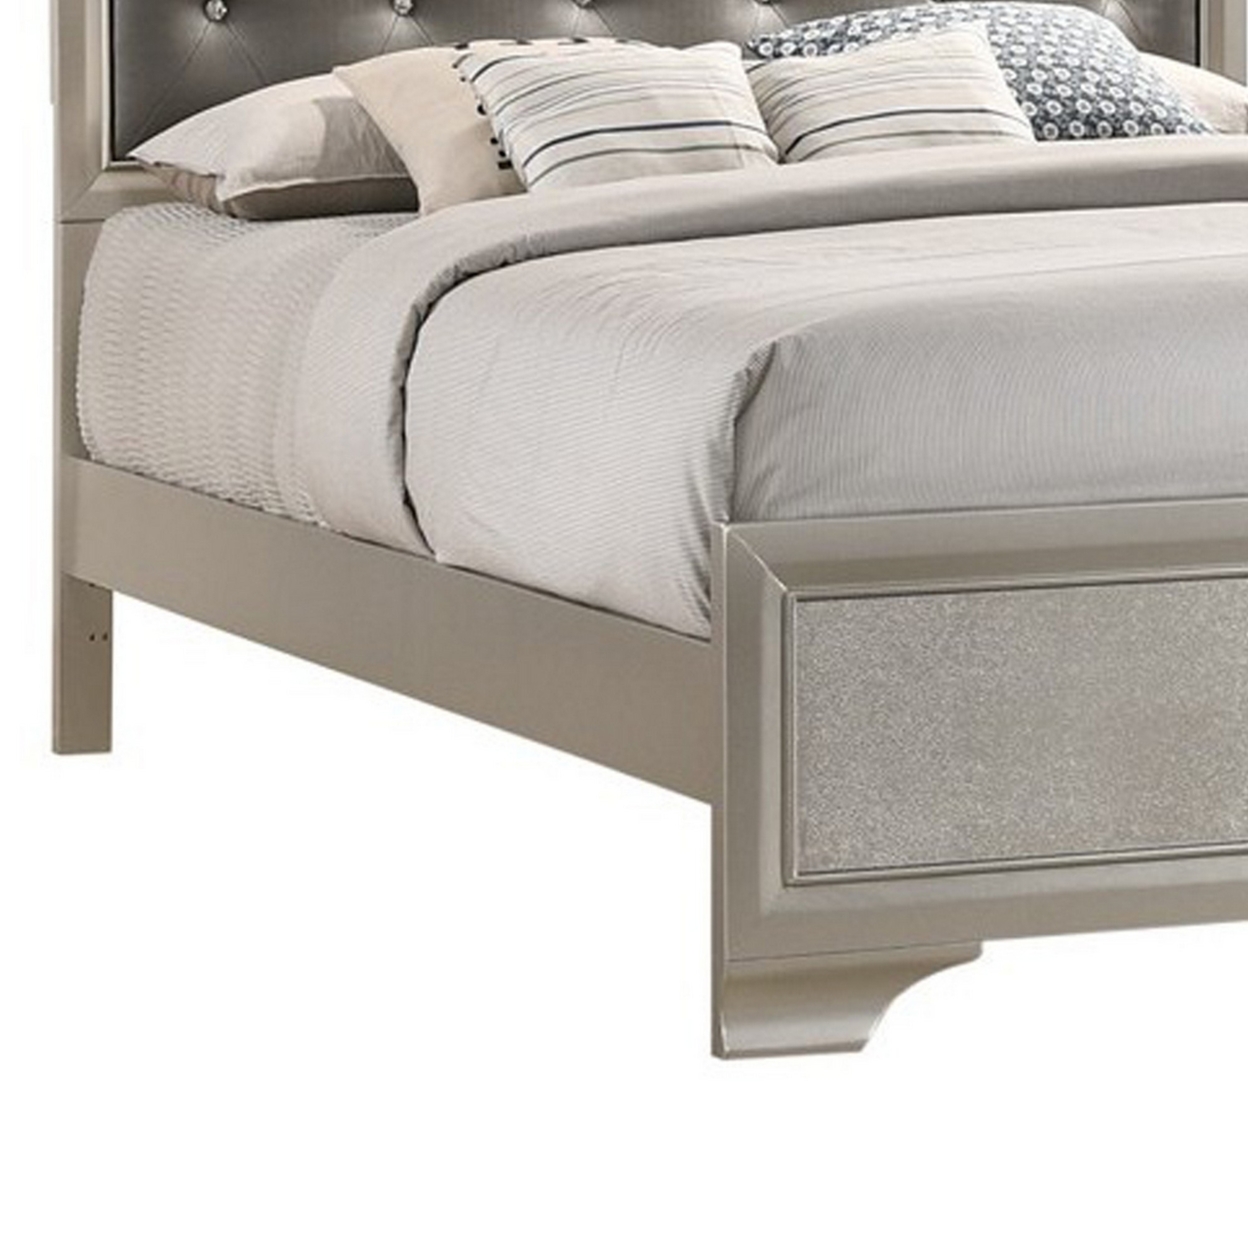 Padded Leatherette Queen Size Bed With Diamond Tufting, Silver And Gray- Saltoro Sherpi